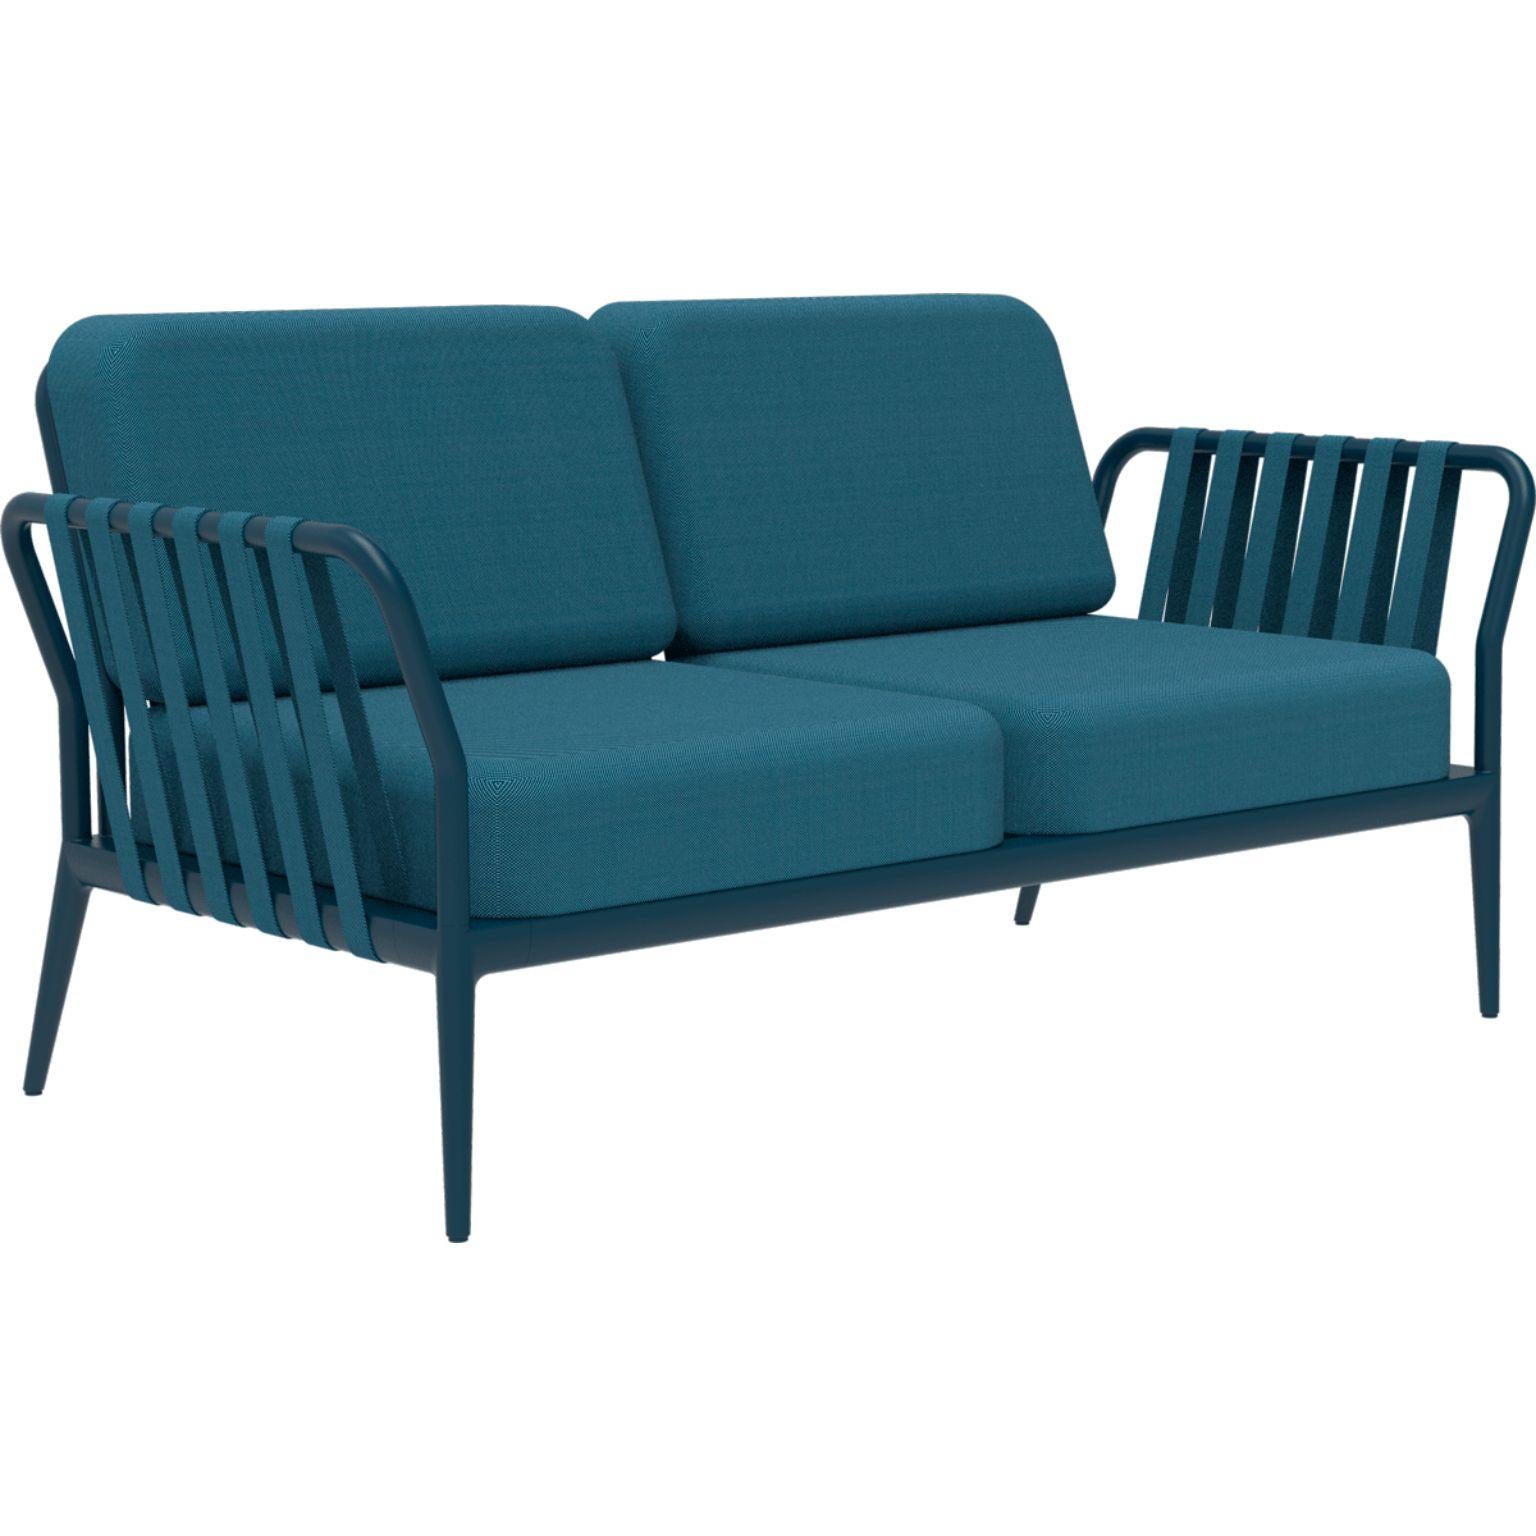 Ribbons navy sofa by Mowee.
Dimensions: D83 x W160 x H81 cm.
Material: Aluminium, upholstery.
Weight: 32 kg
Also available in different colors and finishes. 

An unmistakable collection for its beauty and robustness. A tribute to the Valencian